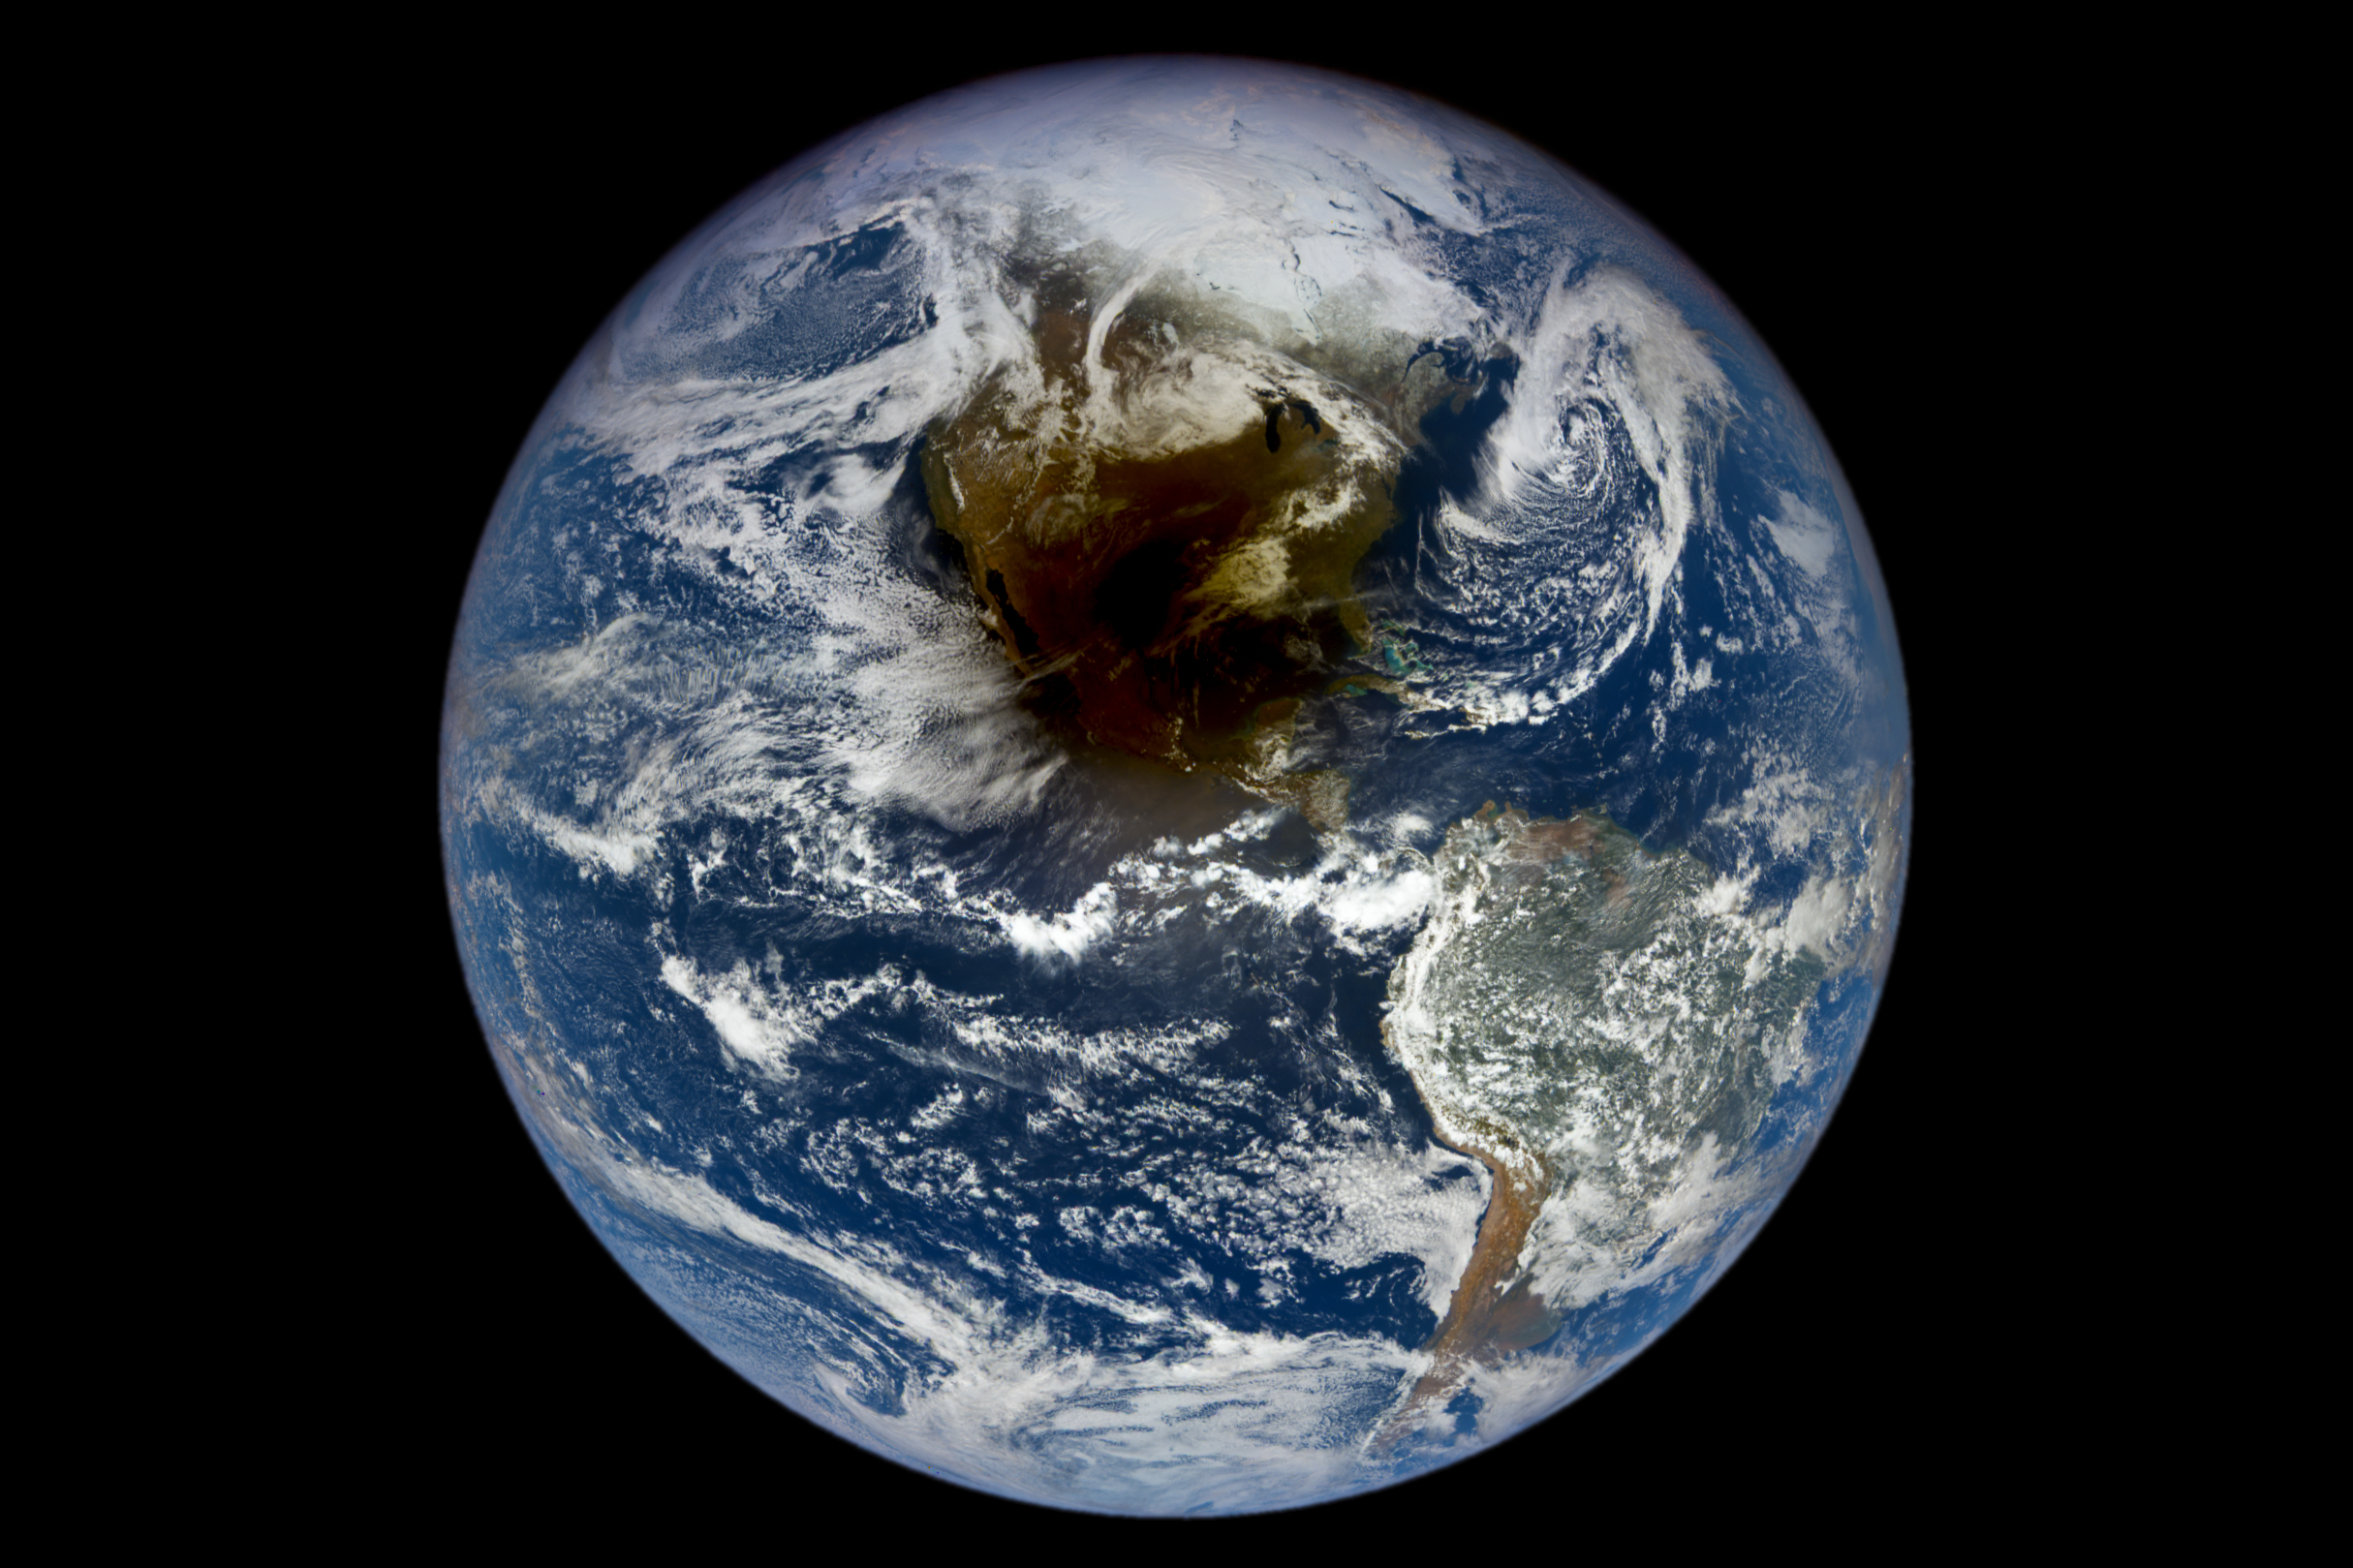 A satellite image of North America shows a darkened spot centered on the South Central United States and Mexico with a gradually increasing gradient of visibility as you move outward. The dim spot that strongly limits the visibility of the land spans from West Coast of Mexico to the Florida panhandle